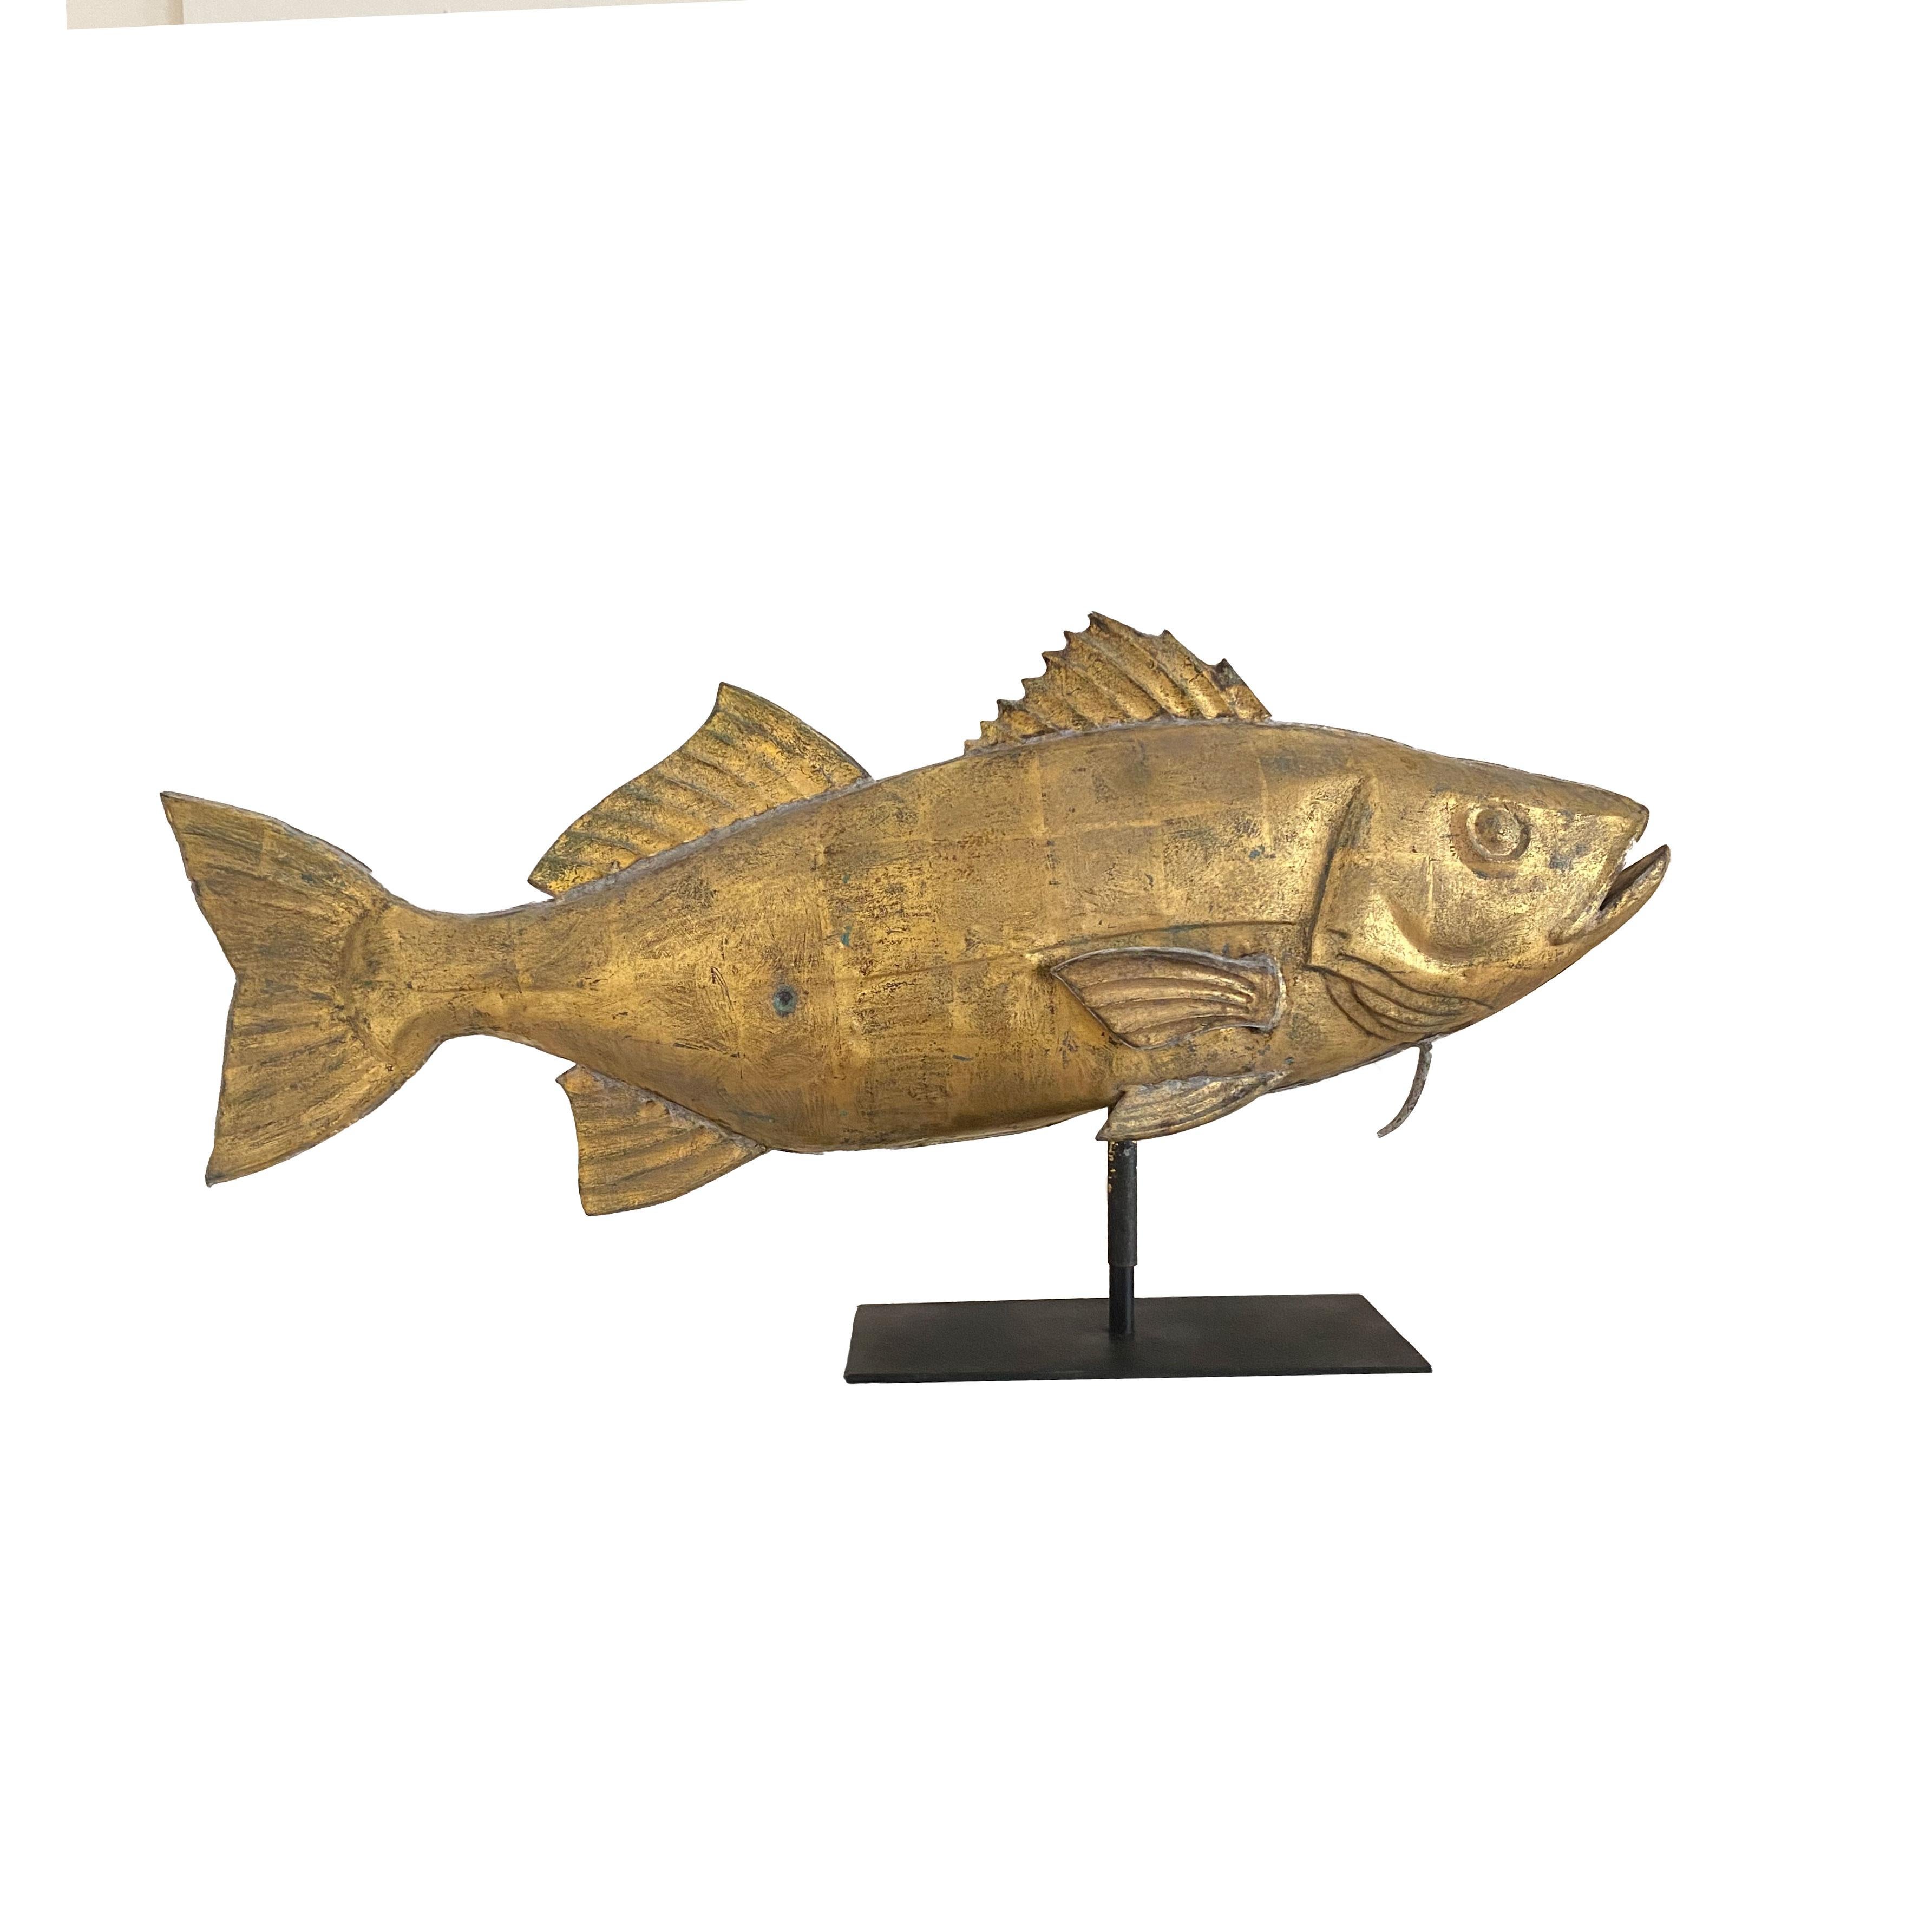 Unusually large full-bodied copper codfish, molded sheet copper fins with soldering, and a iron barbel. Original gold leaf surface, with minor dents and surface wear, showing some verdigris. A great oversized sculpture, a true one of a kind item.